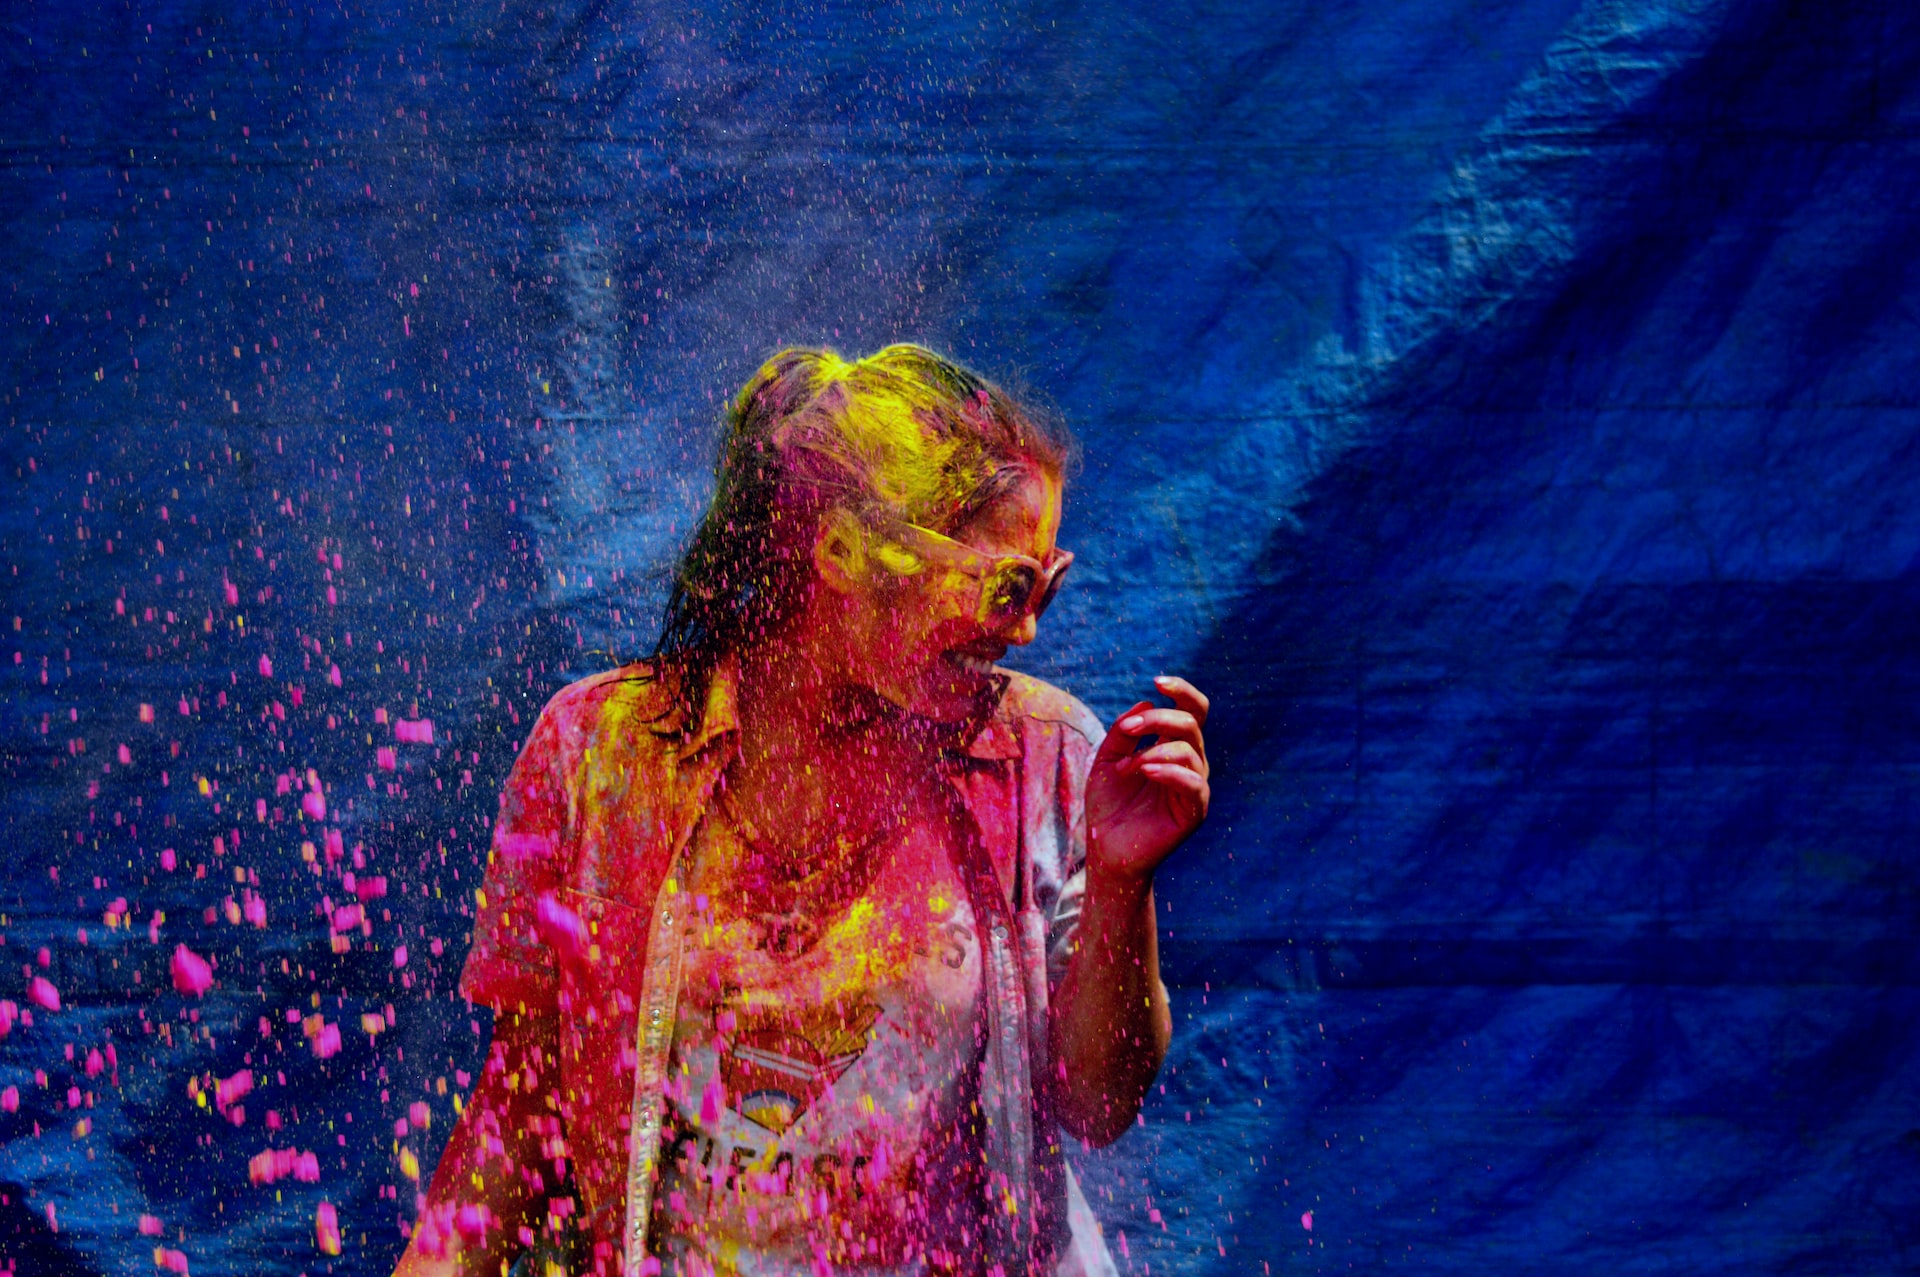 A girl covered head to toe in colorful powder.